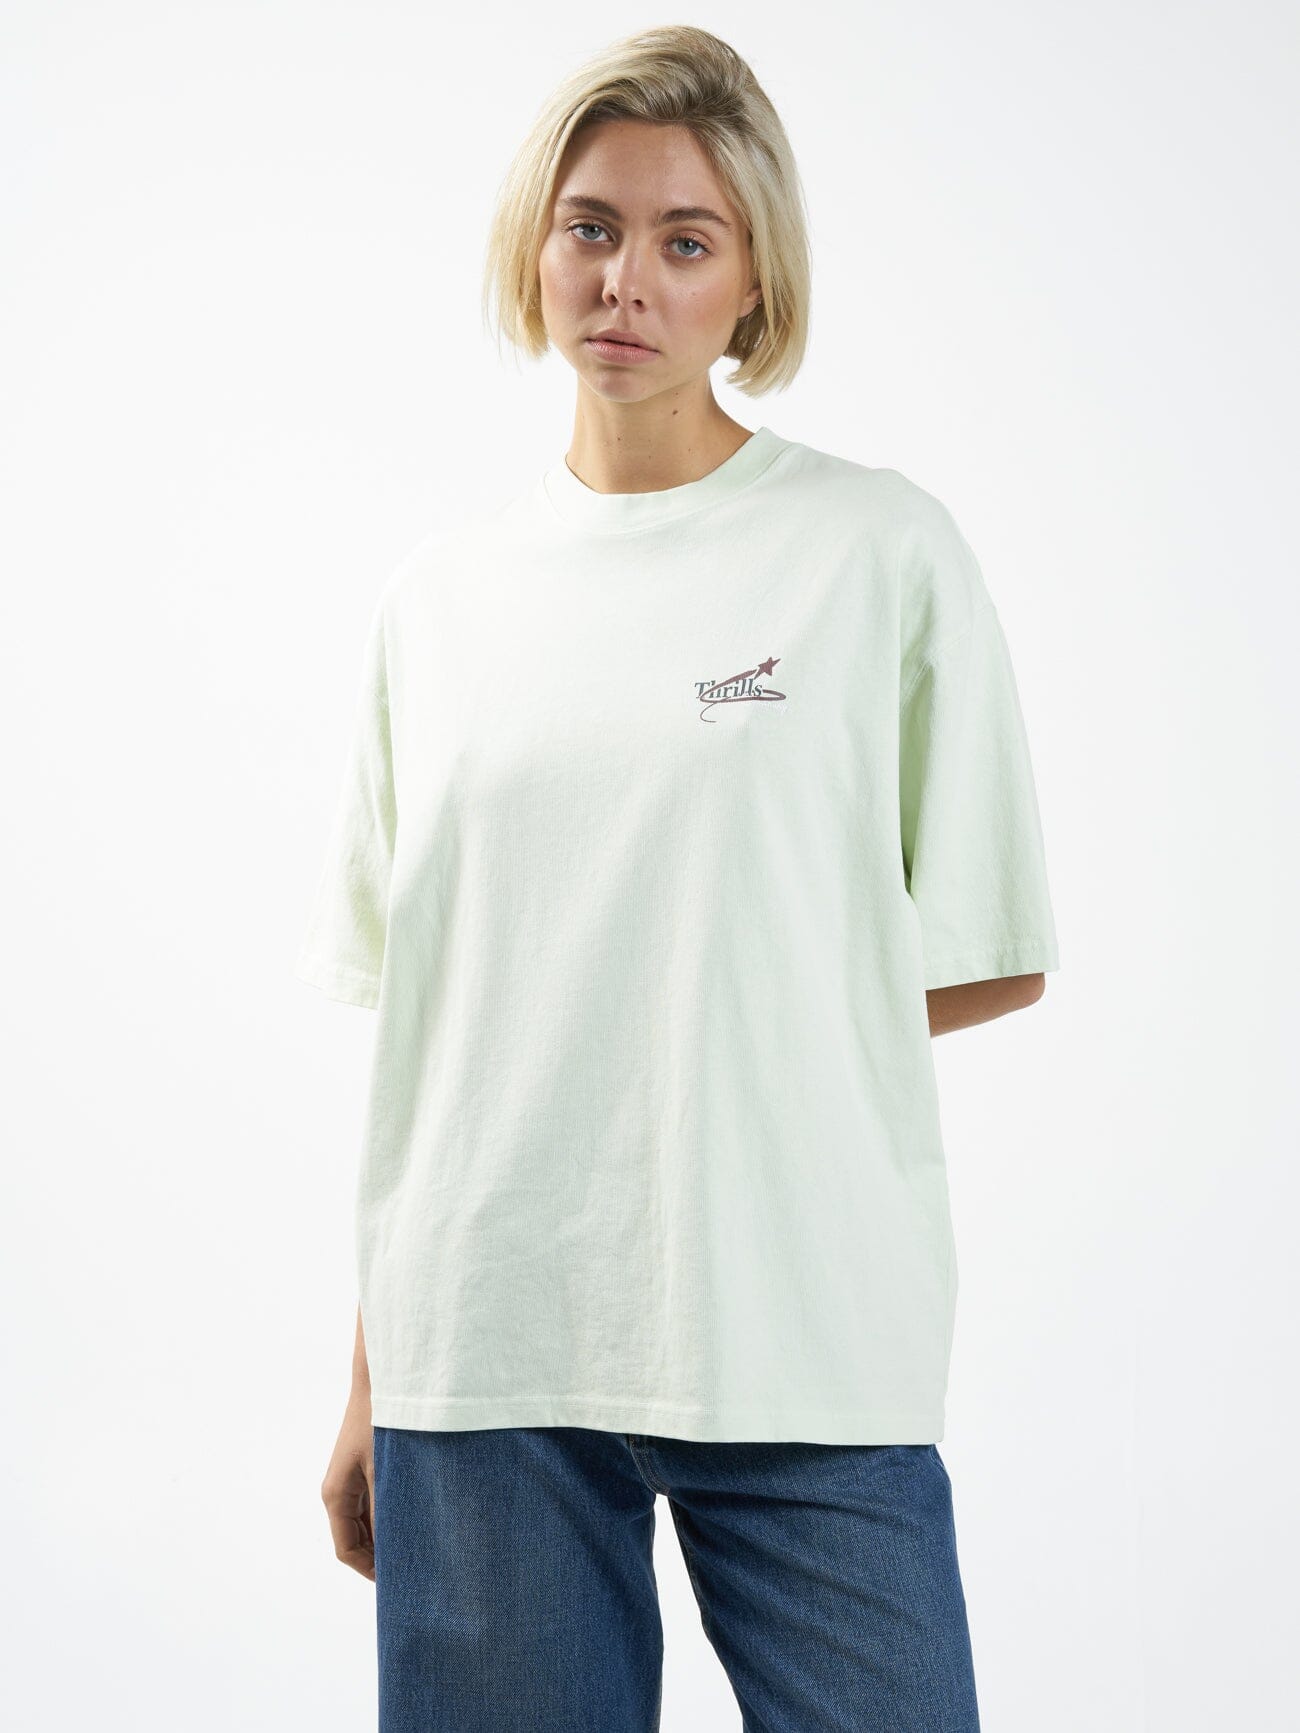 Earths Vibrations Oversized Tee - Washed Mint